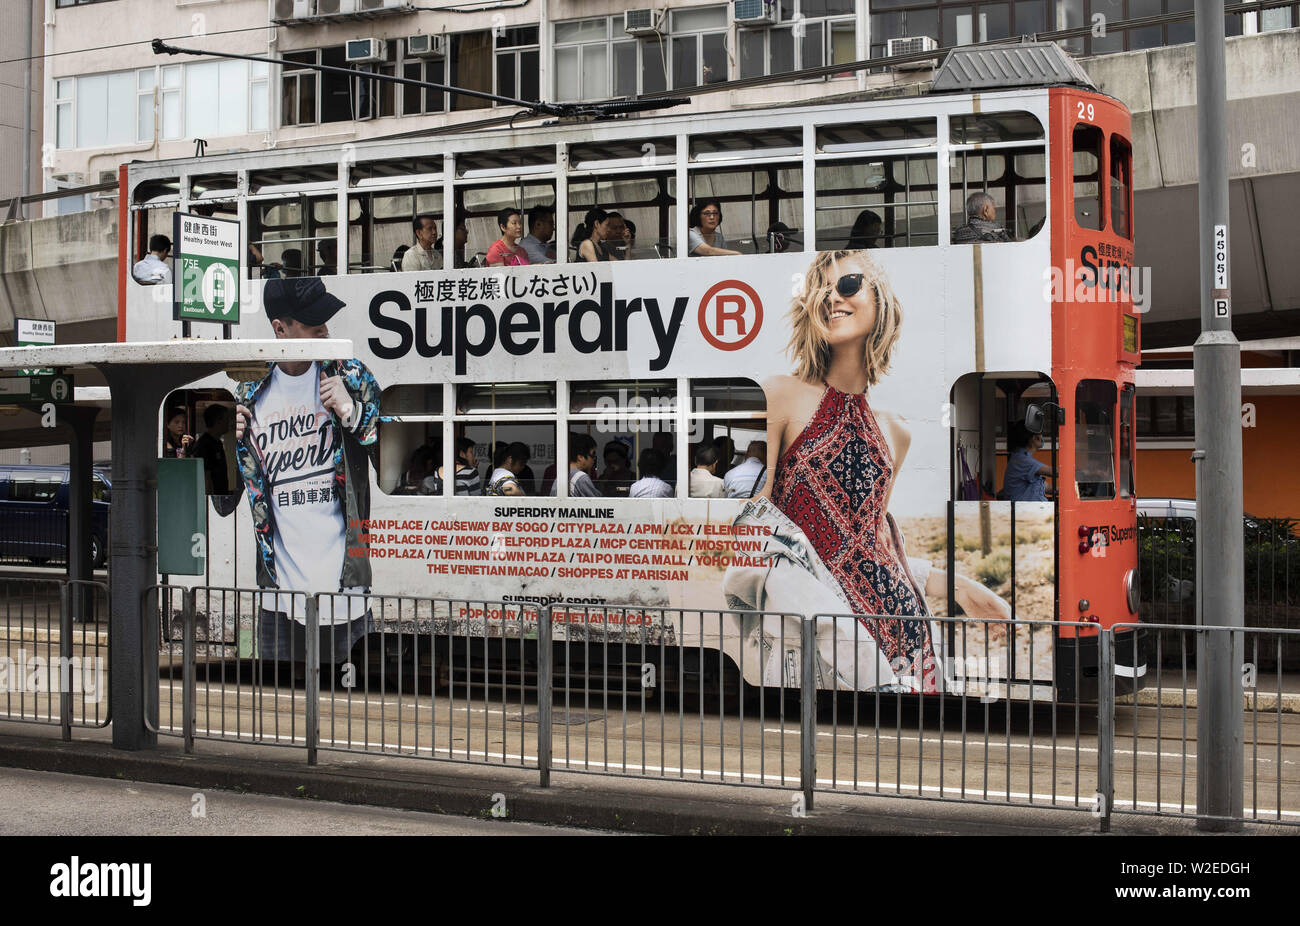 Hong Kong, China. 25th June, 2019. Double-deck tram runs in Hong Kong  covered with British clothing brand Superdry brand advertisement theme.  Credit: Budrul Chukrut/SOPA Images/ZUMA Wire/Alamy Live News Stock Photo -  Alamy